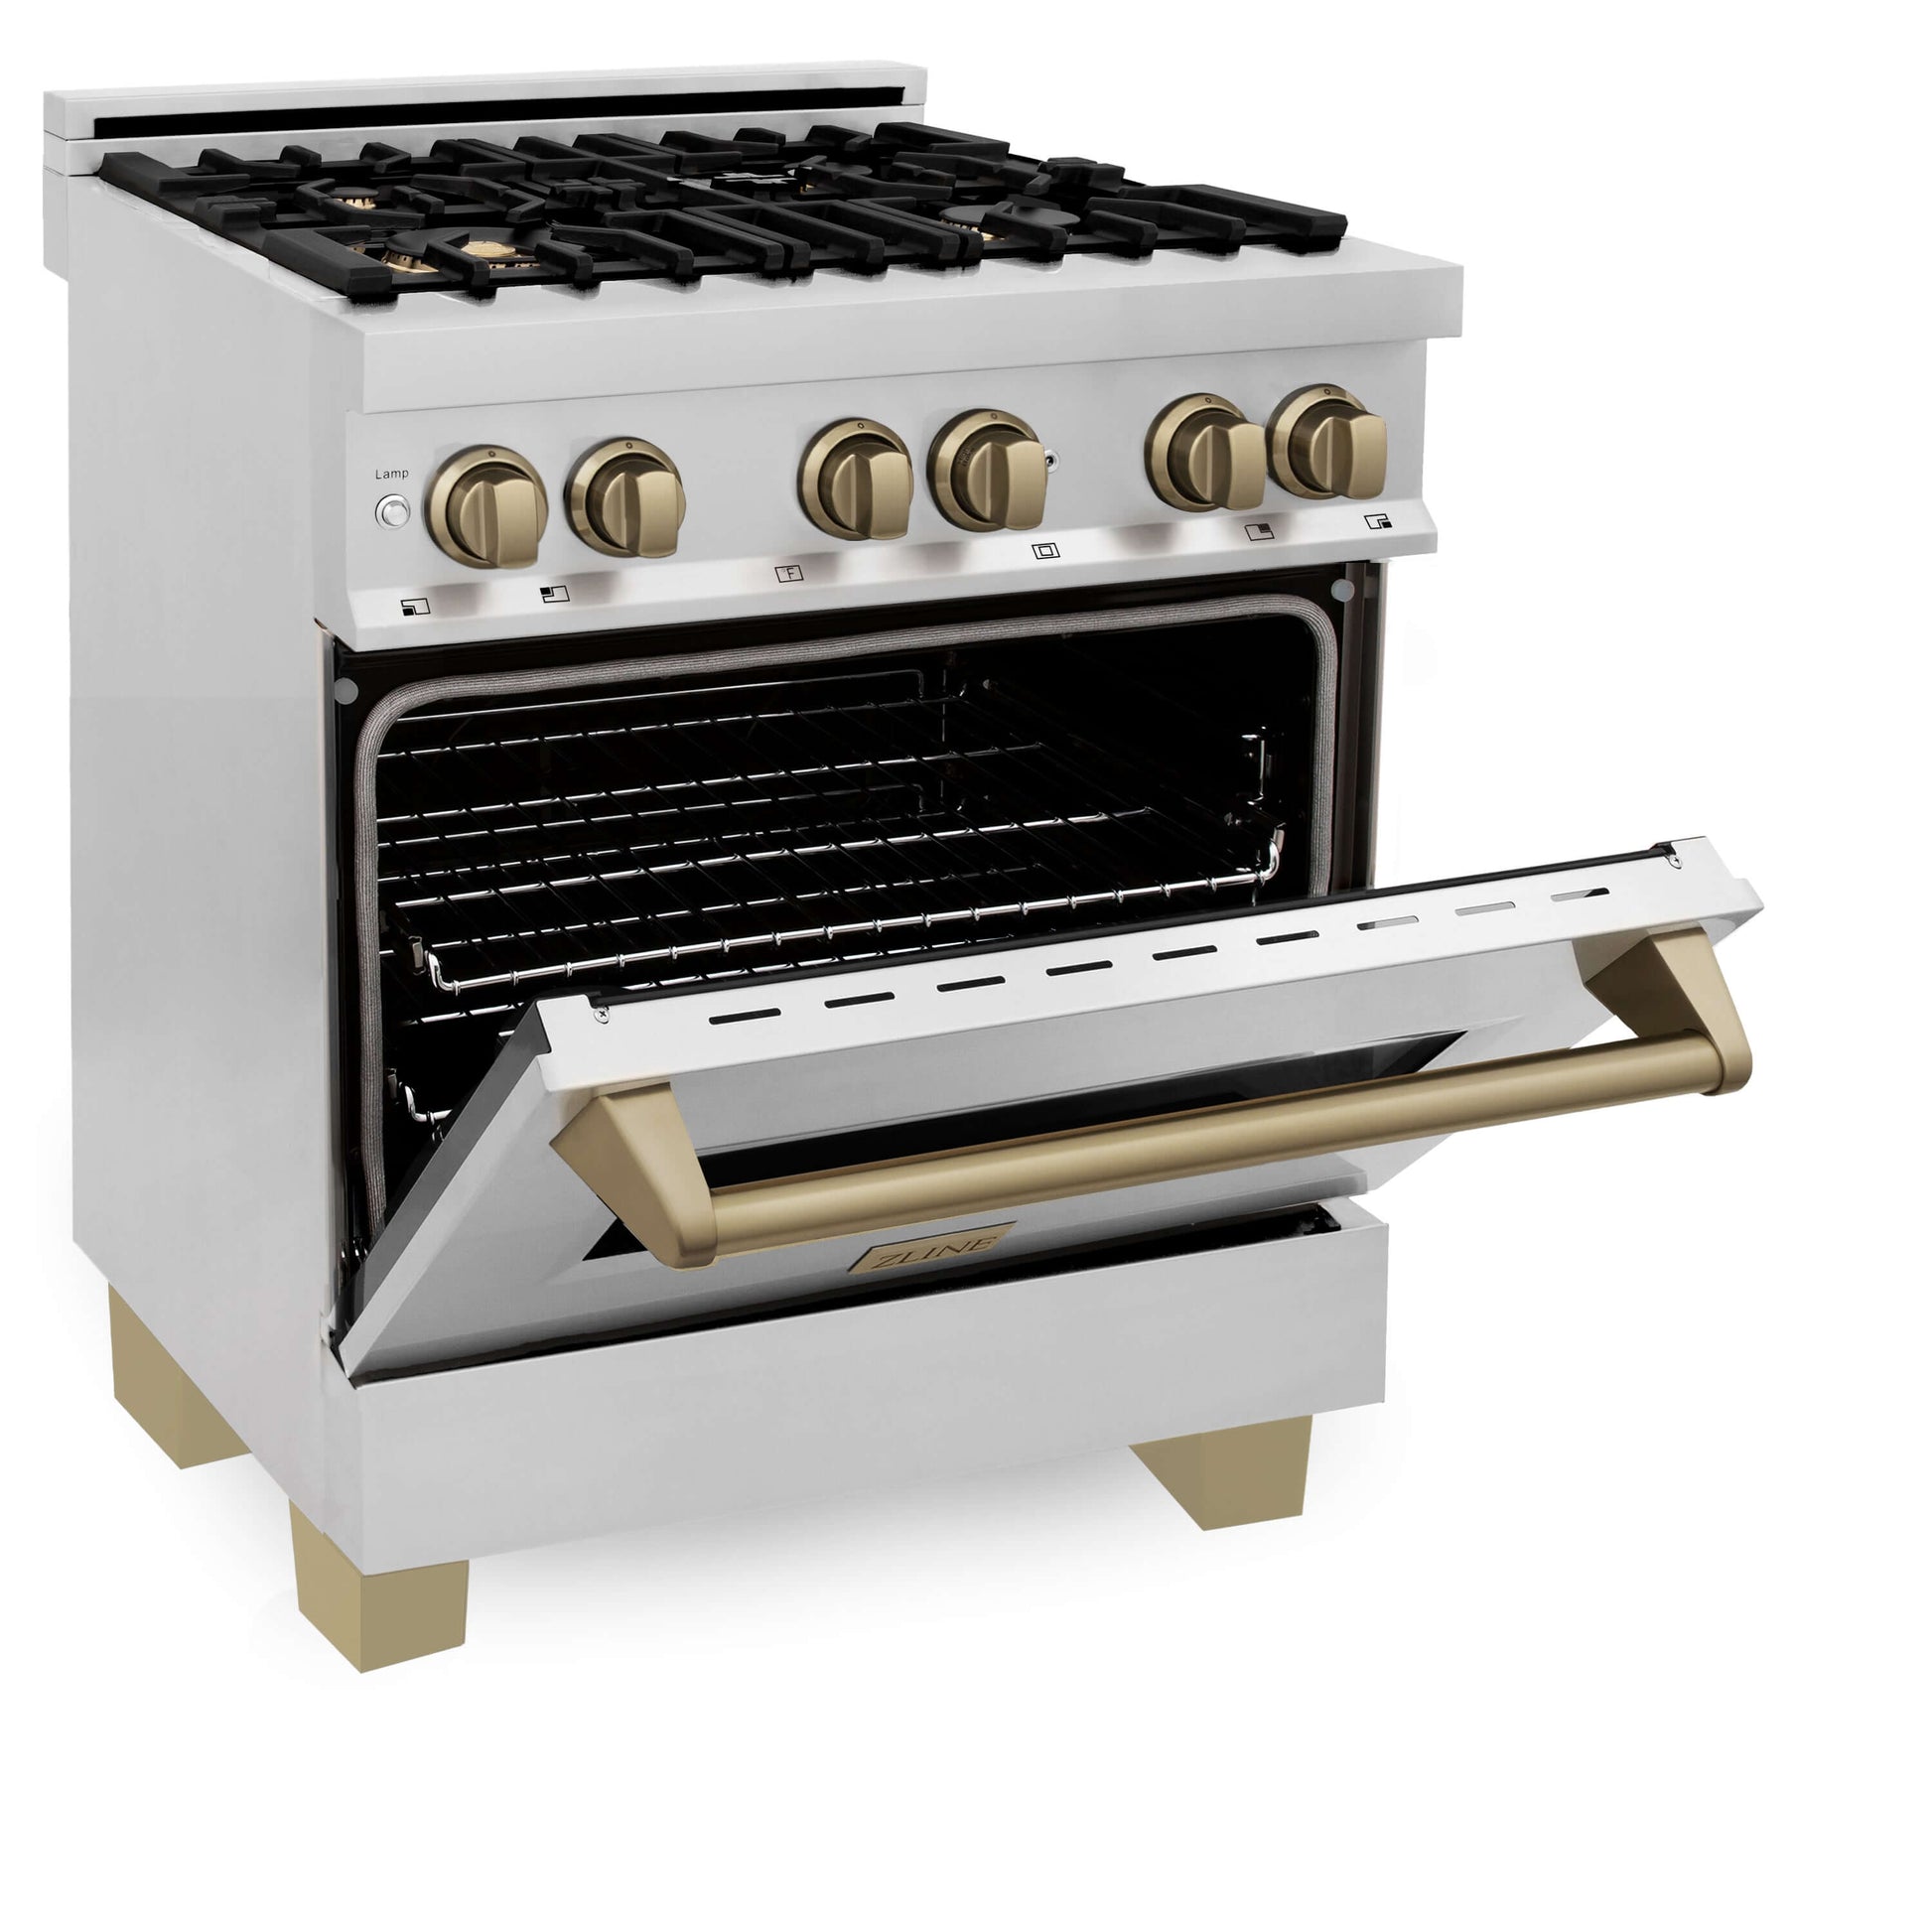 ZLINE 4-Appliance 30" Autograph Edition Kitchen Package with Stainless Steel Dual Fuel Range, Range Hood, Dishwasher, and Refrigeration with Champagne Bronze Accents